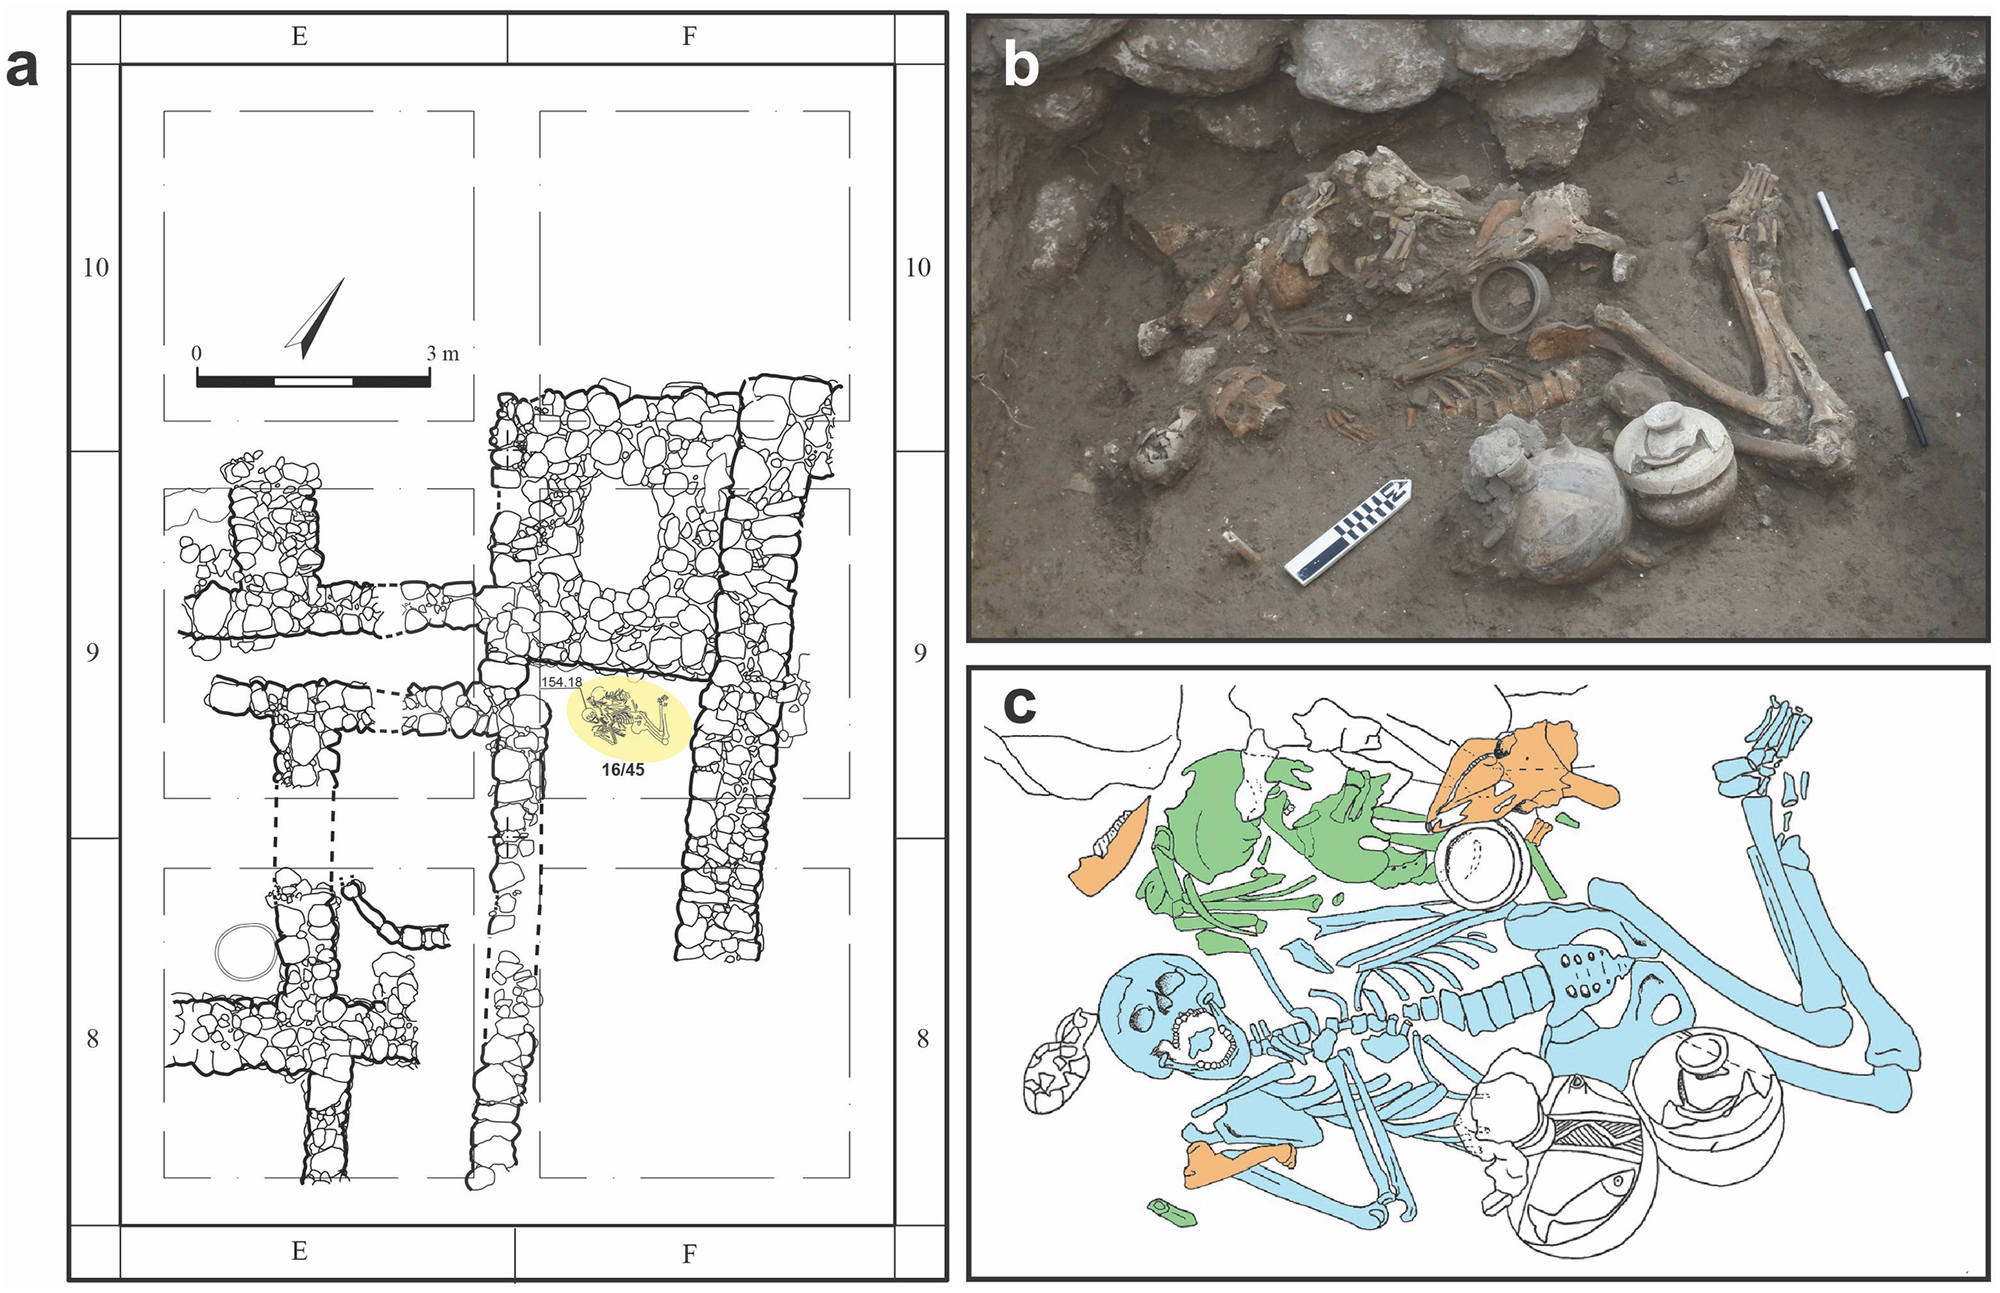 Collage of images showing the floorplan of a structure, an image of two skeletons in situ